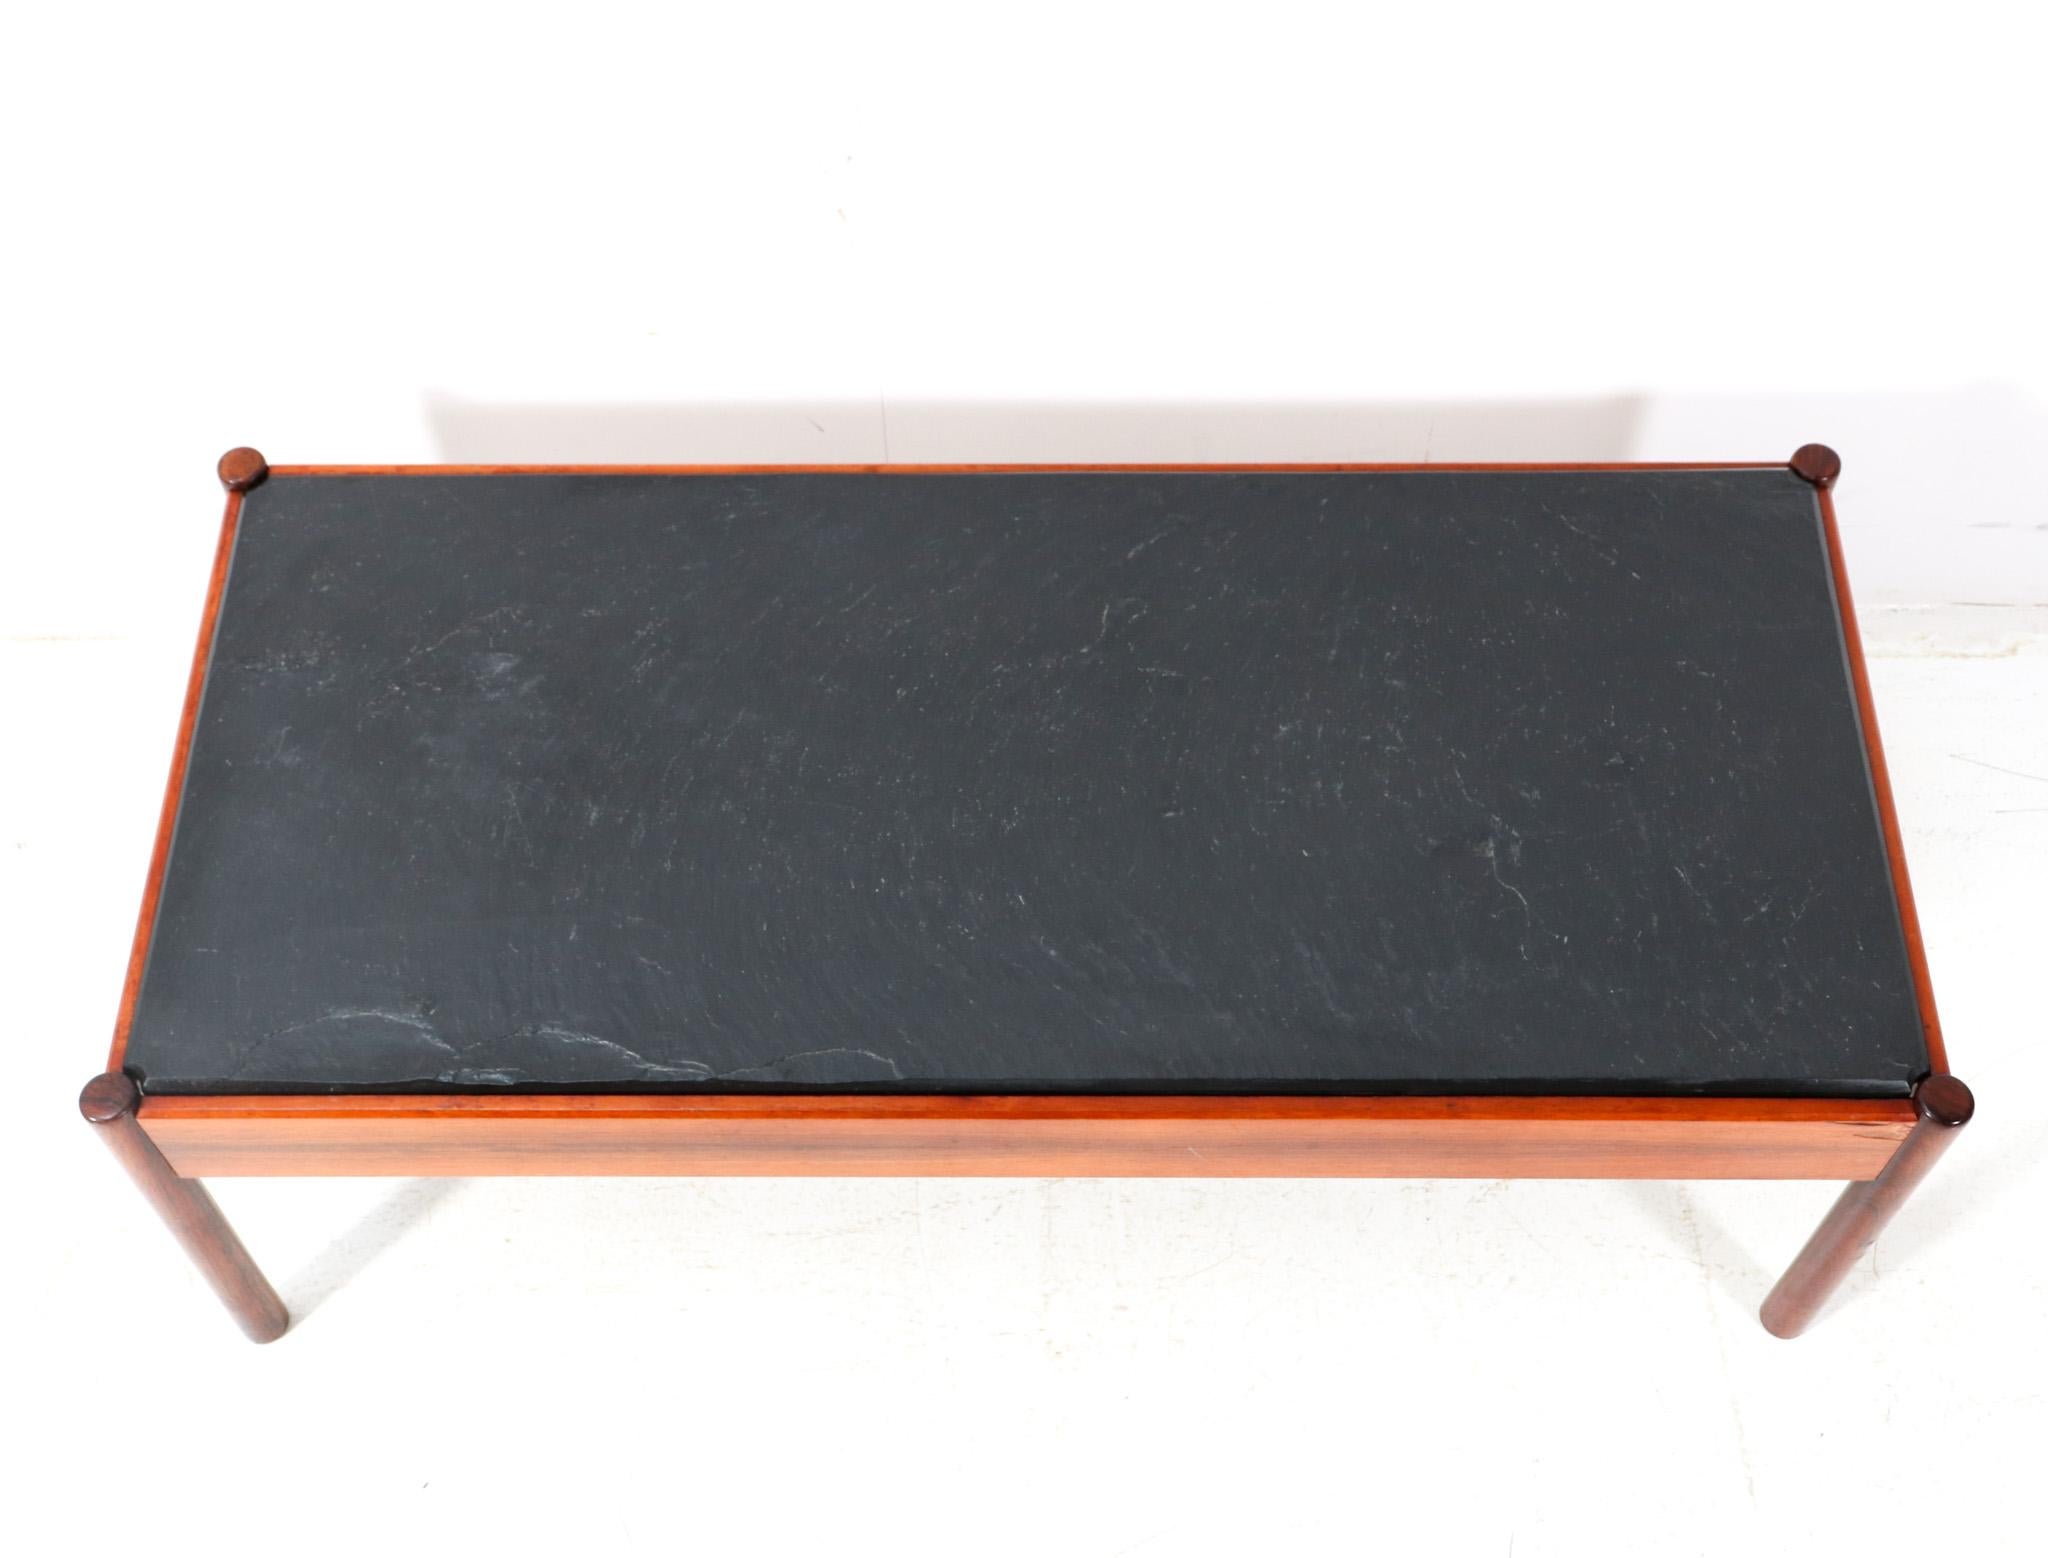 Teak Mid-Century Modern Coffee table with Slate Top, 1960s For Sale 1